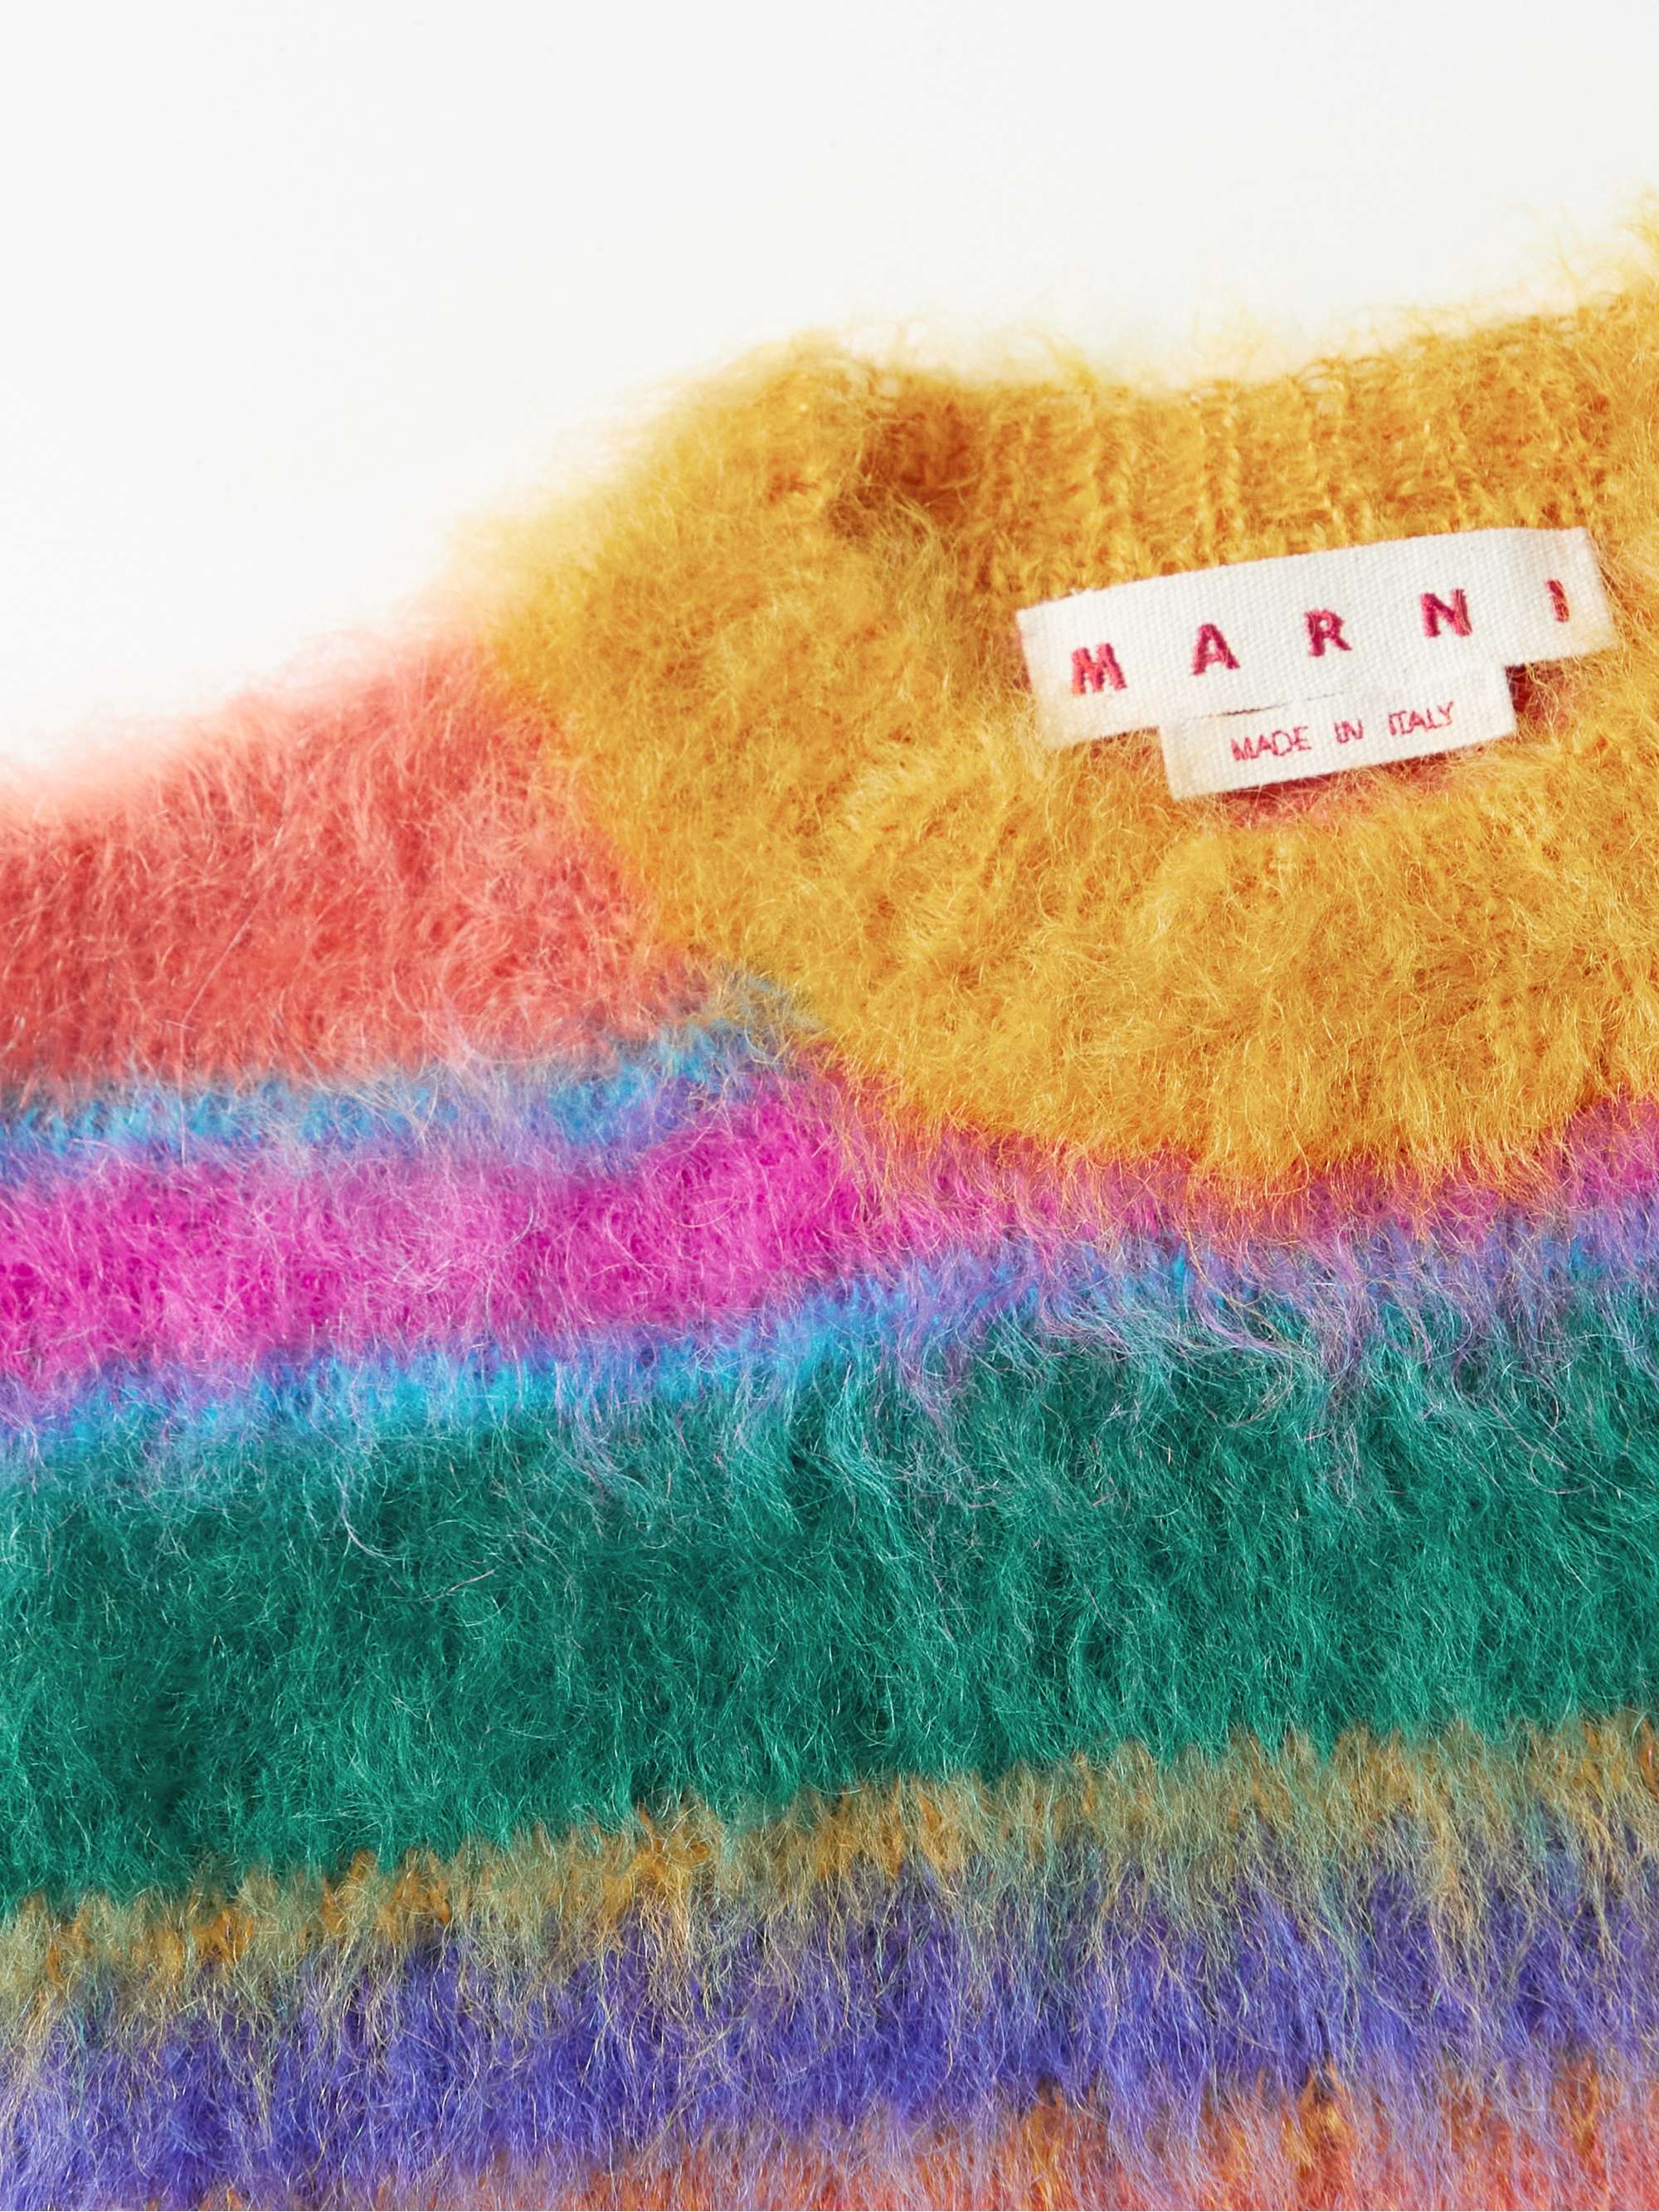 MARNI Striped Mohair-Blend Sweater